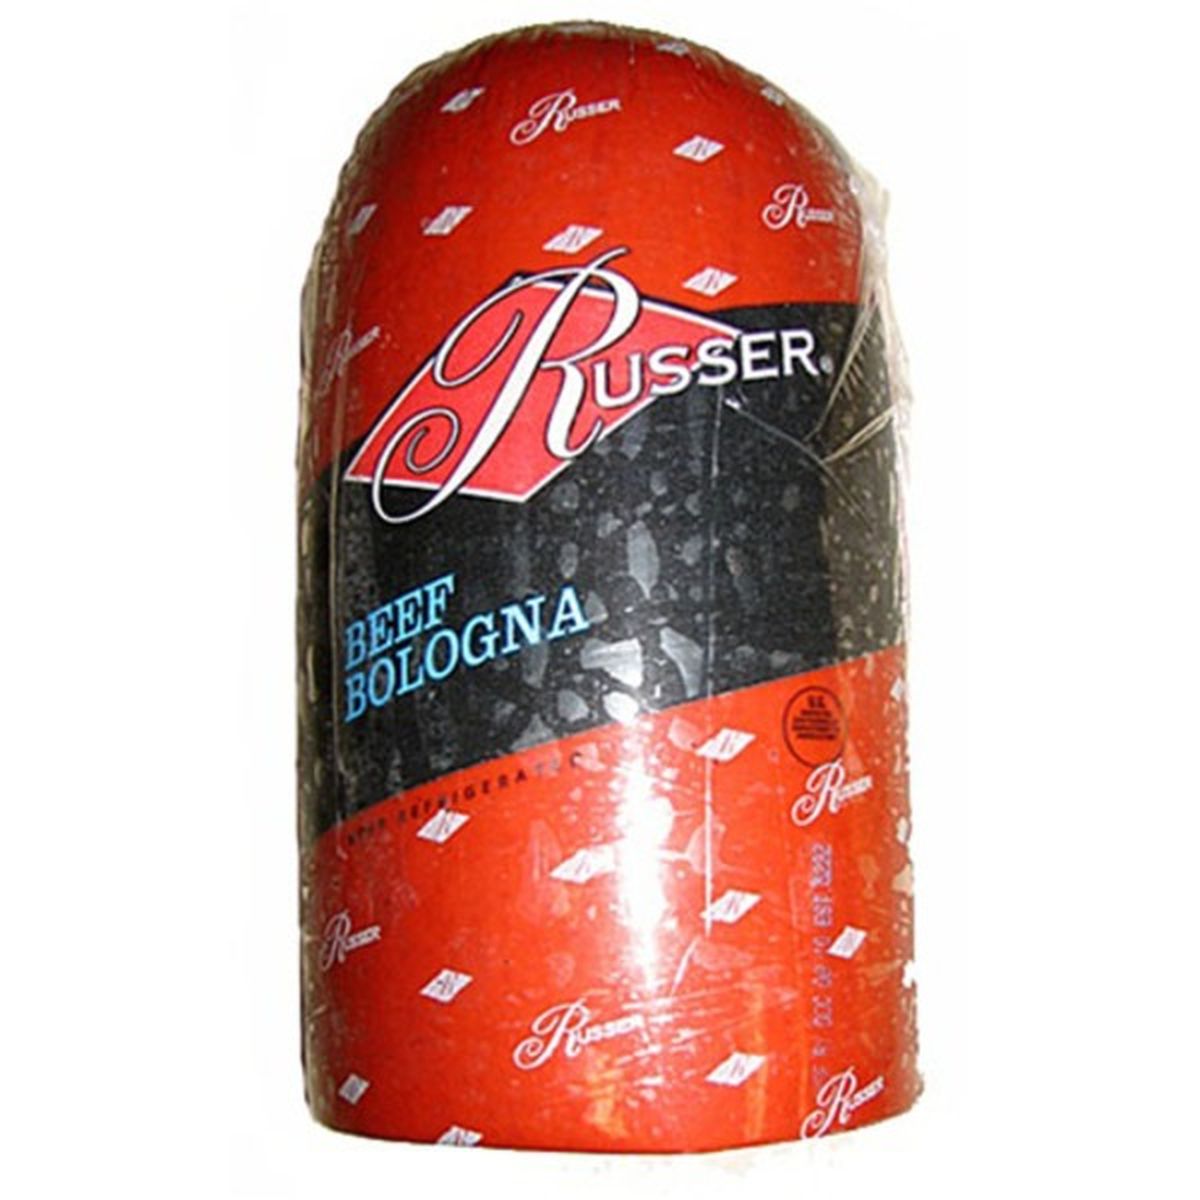 Calories in Russer Beef Bologna